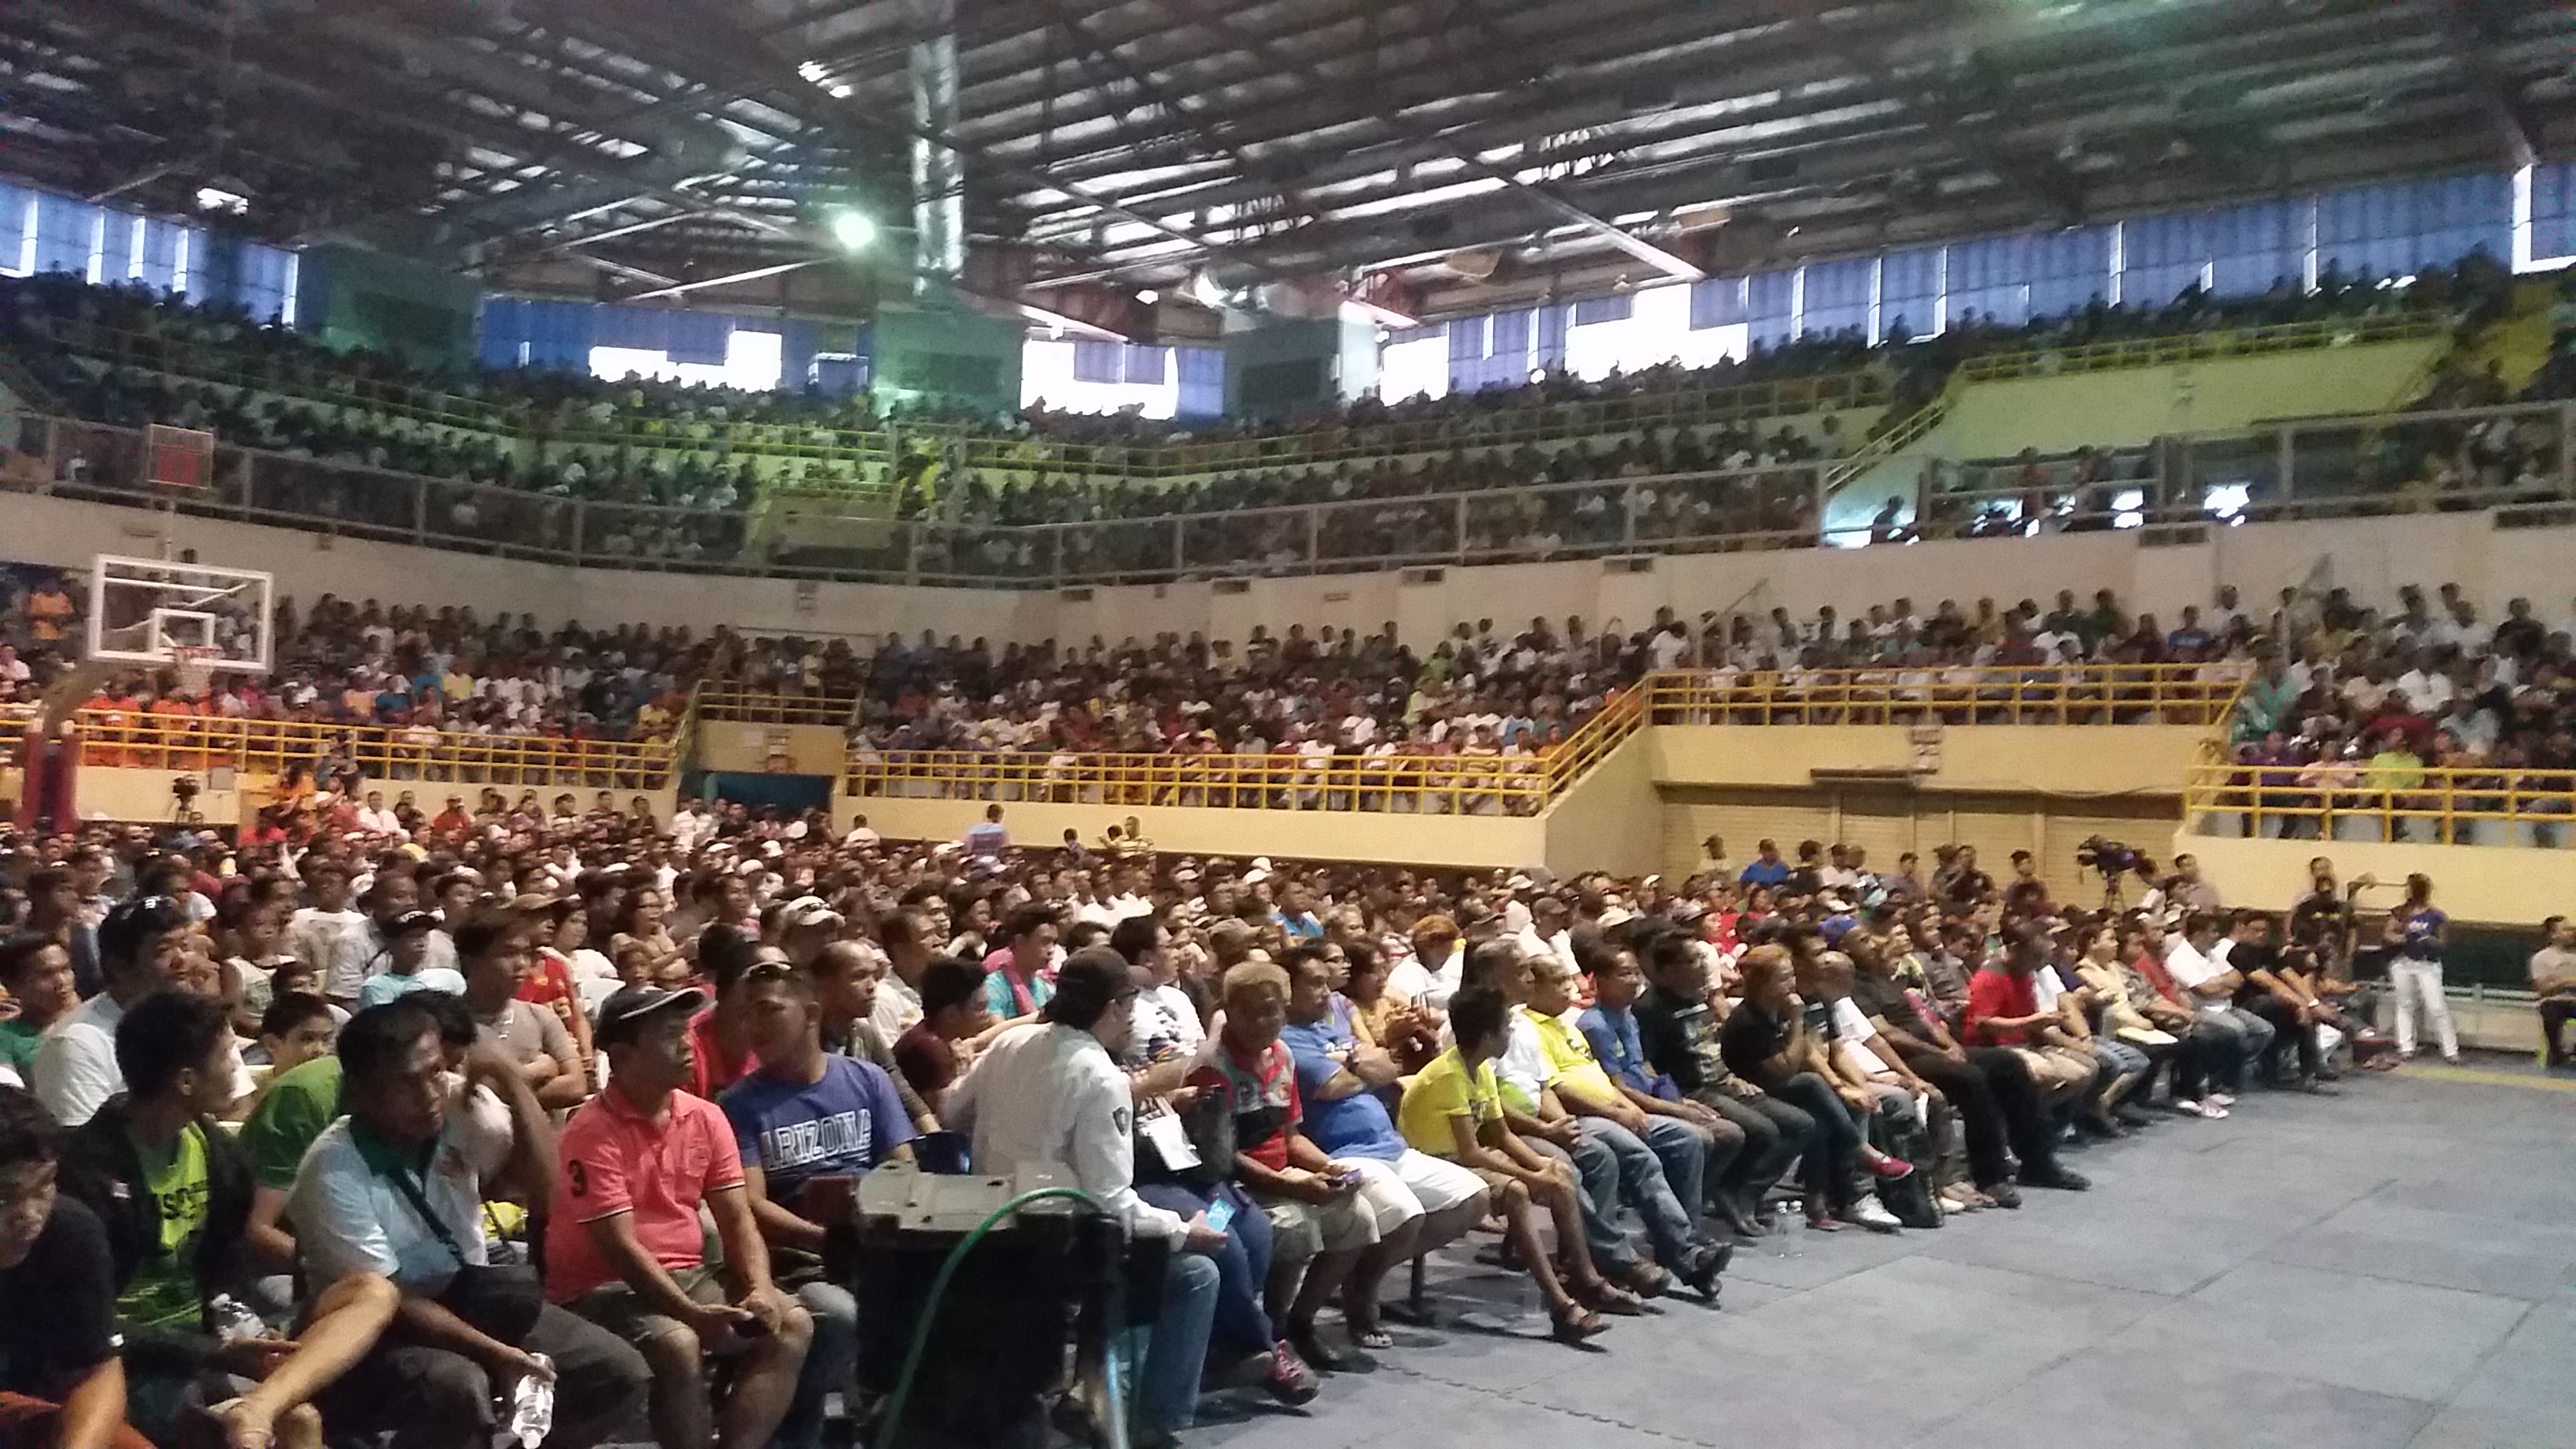 People watch Manny Pacquiao's fight against Floyd Mayweather at the Lagao Gymnasium in General Santos City, the Philippines, on May 3, 2015 (Rishi Iyengar—TIME)